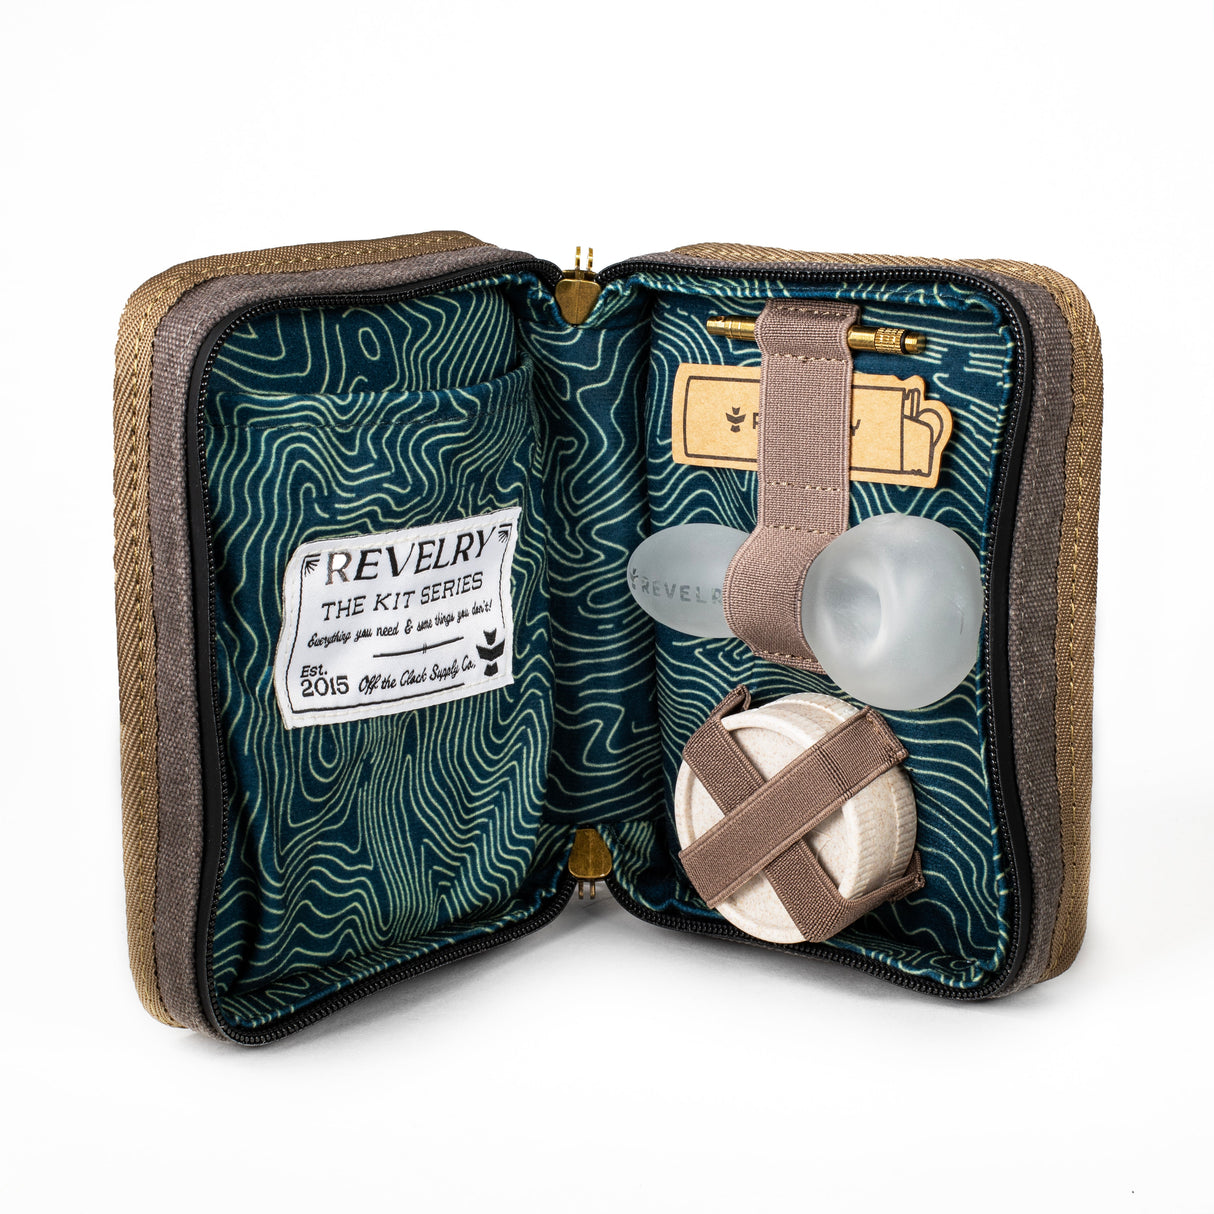 Revelry Supply - The Pipe Kit Open View showing Smell Proof Compartments and Accessories